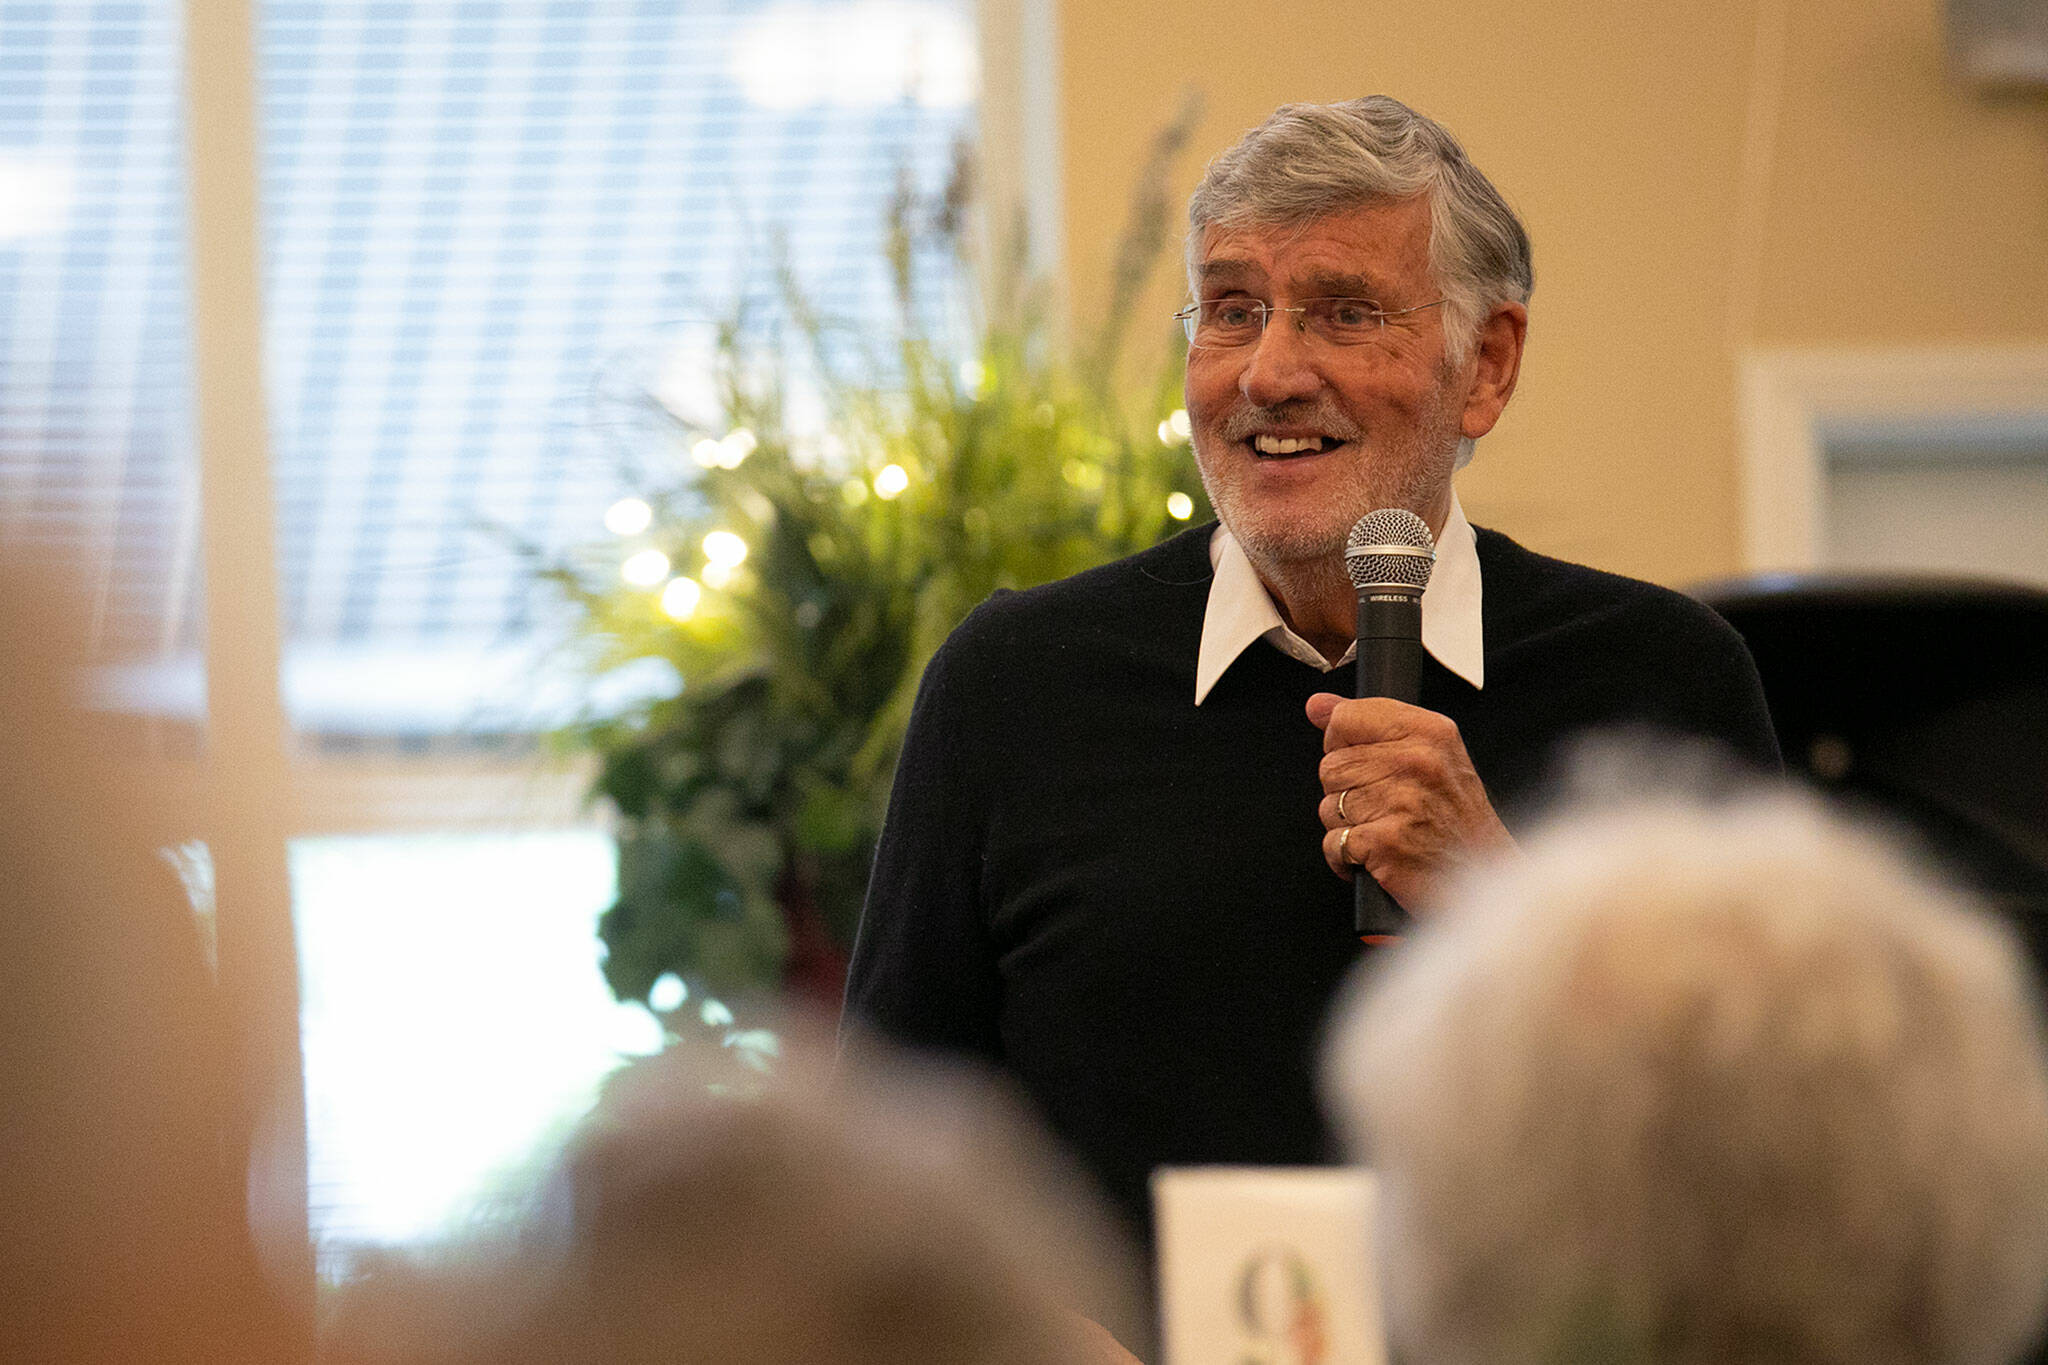 “The Galloping Gourmet” star Graham Kerr tells the story of what he calls his “abundant life” to residents of Windsor Square Retirement Community in Marysville. Kerr, 88, lives in Warm Beach. (Ryan Berry / The Herald)